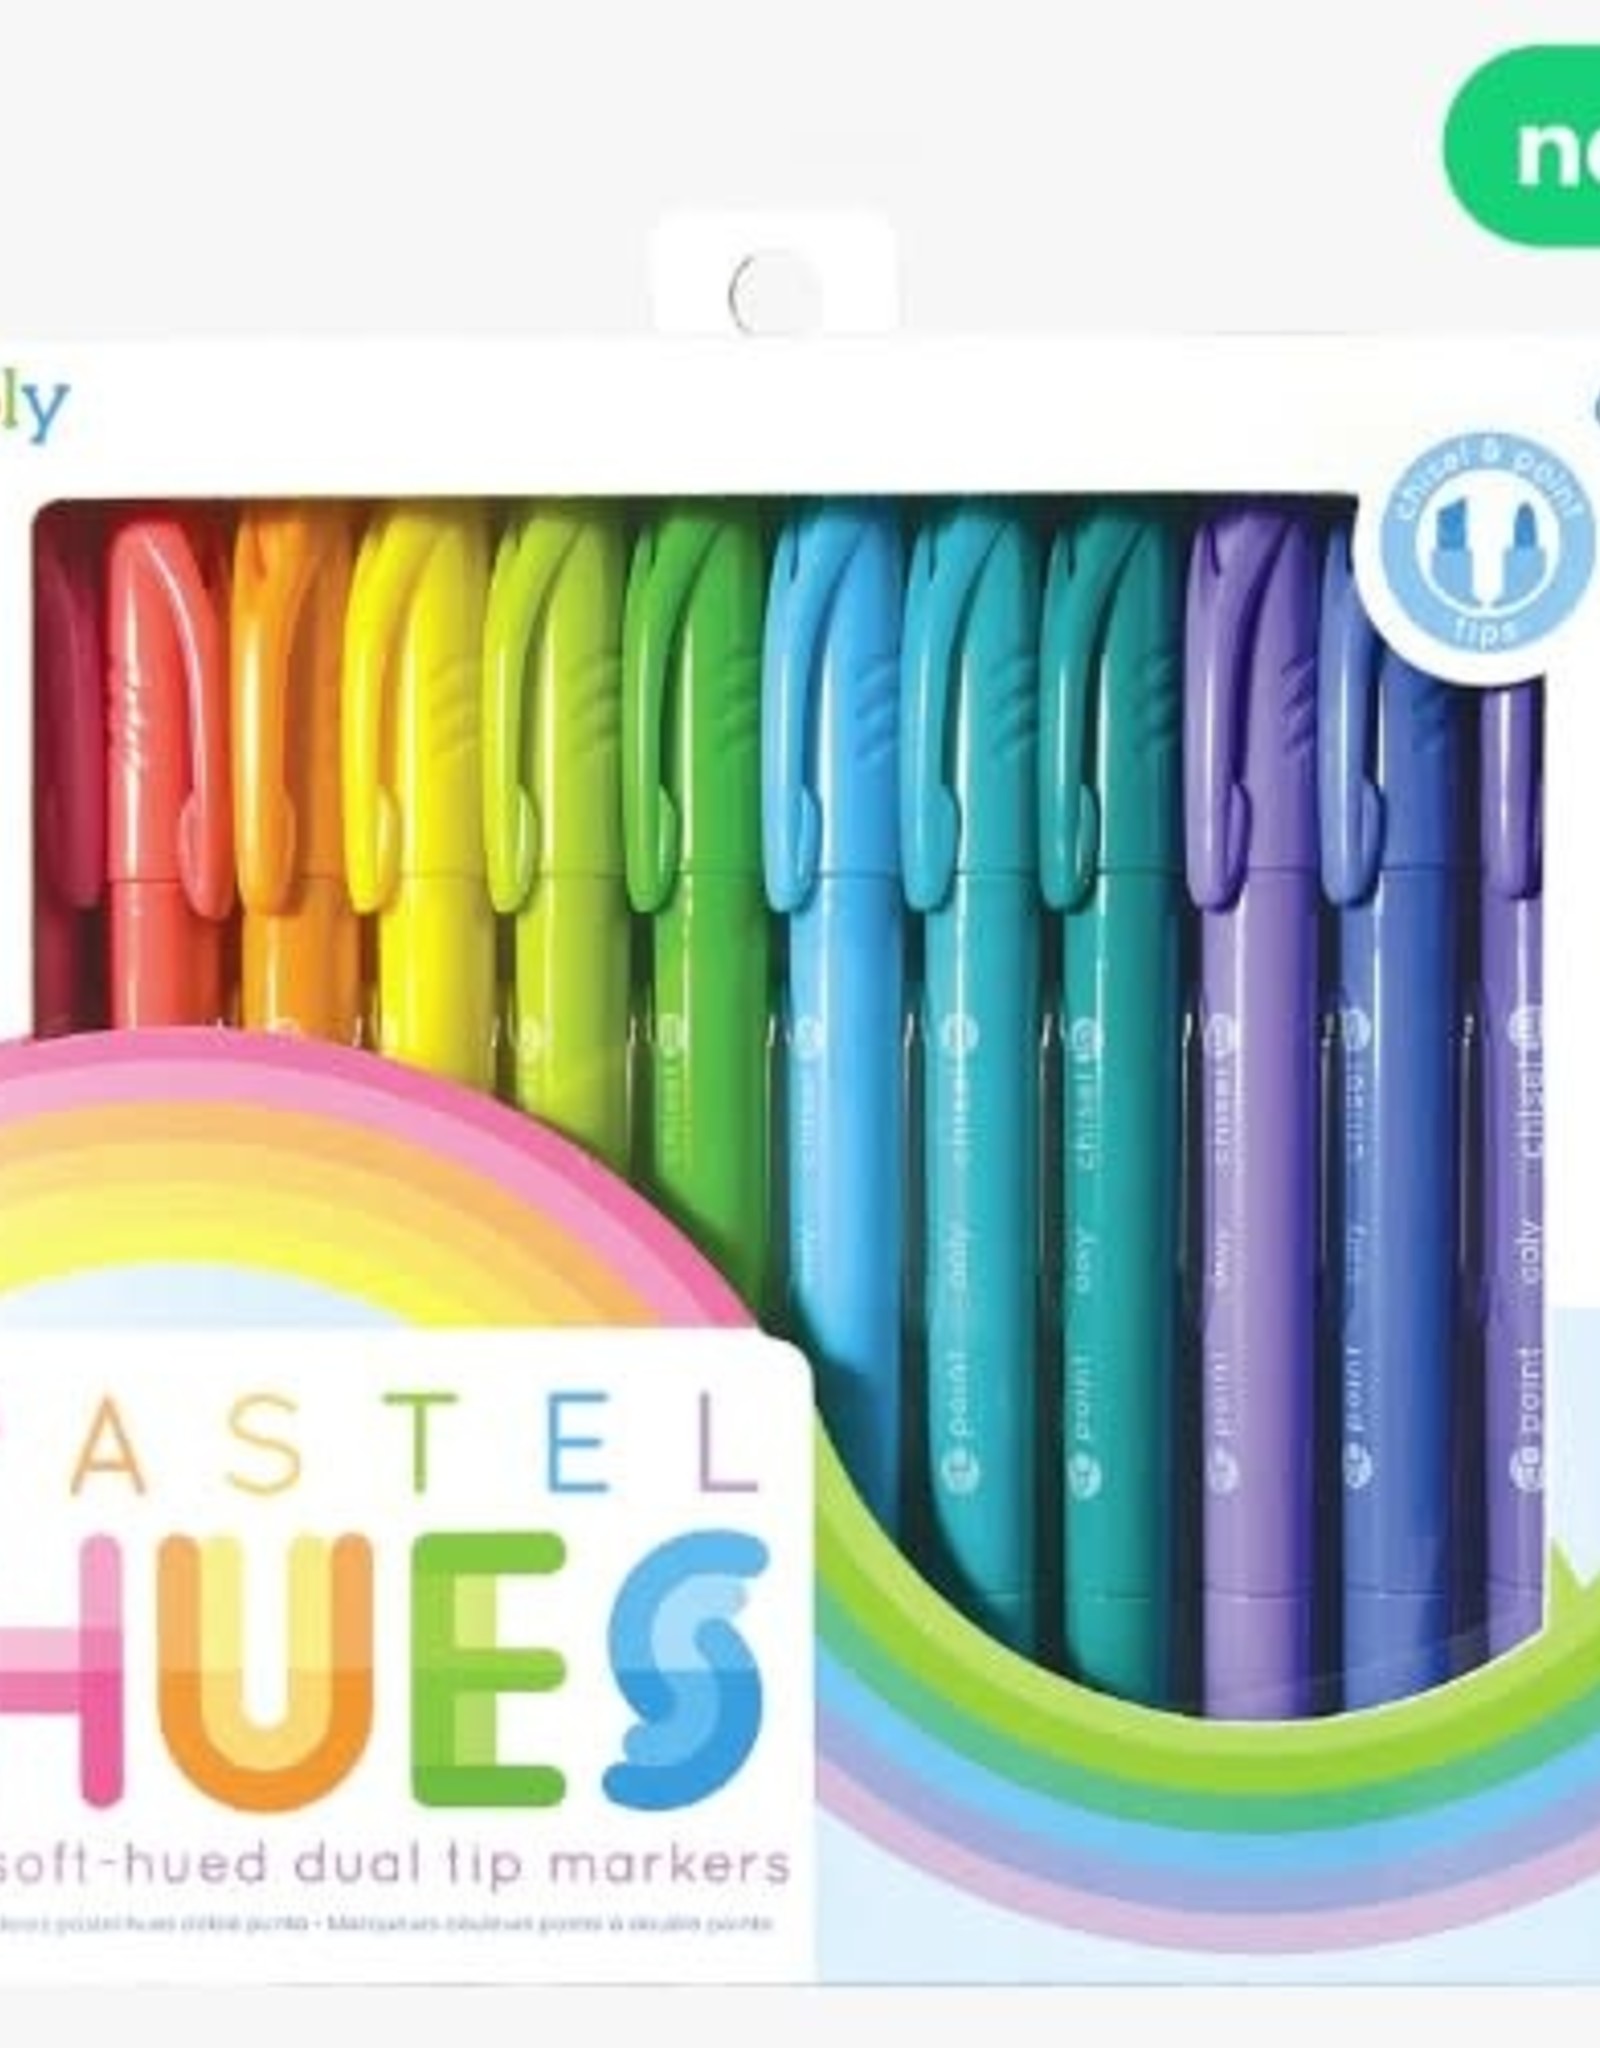 OOLY PASTEL HUES MARKERS - SET OF 12